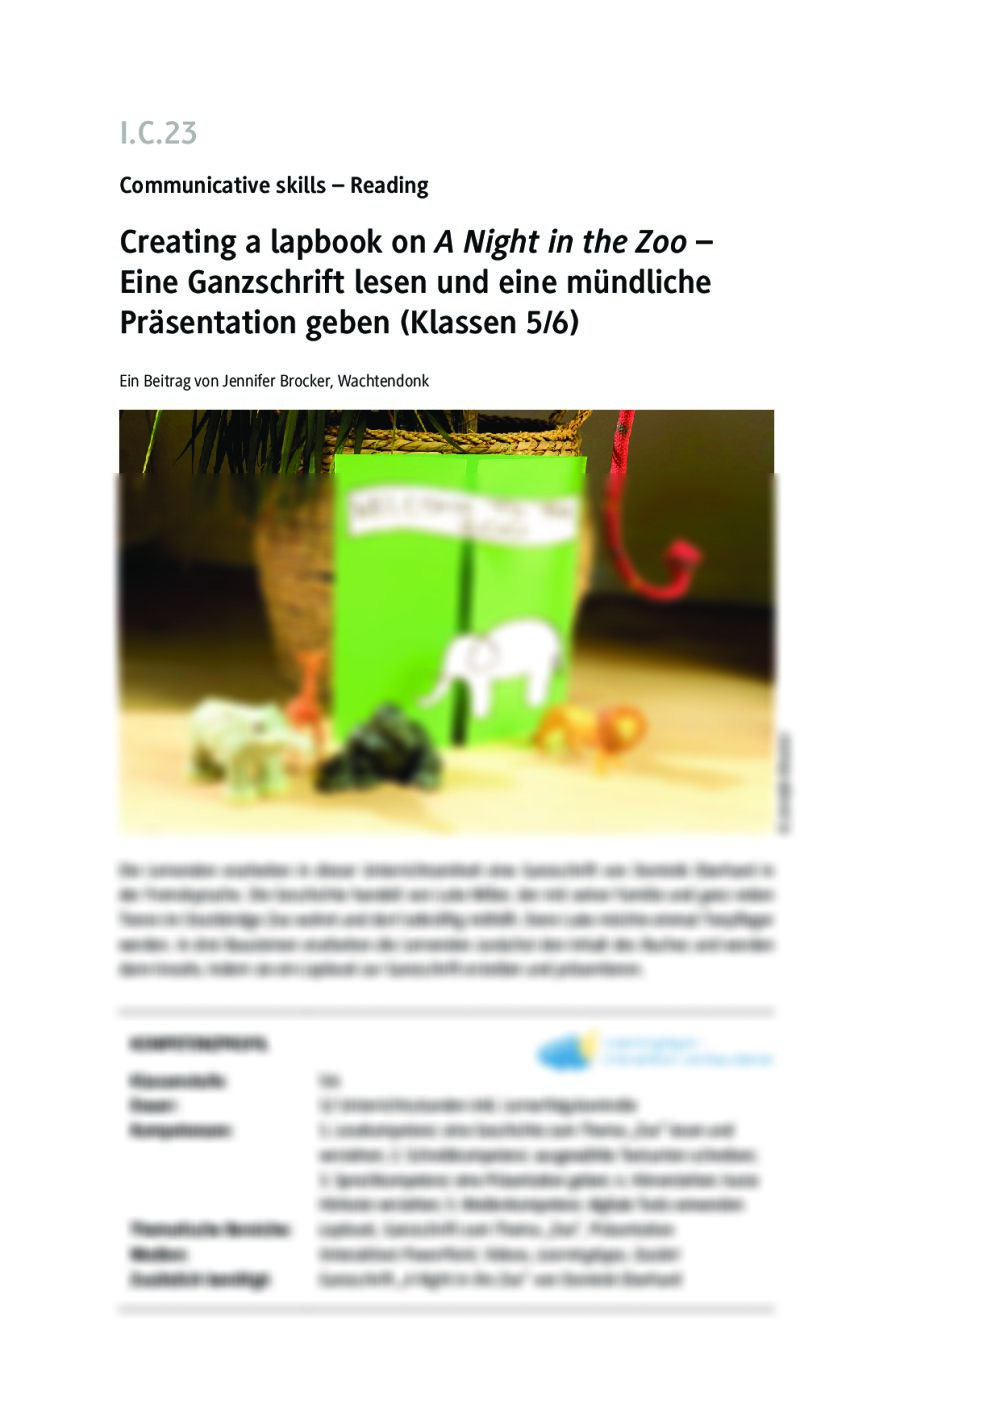 Creating a lapbook on "A Night in the Zoo" - Seite 1